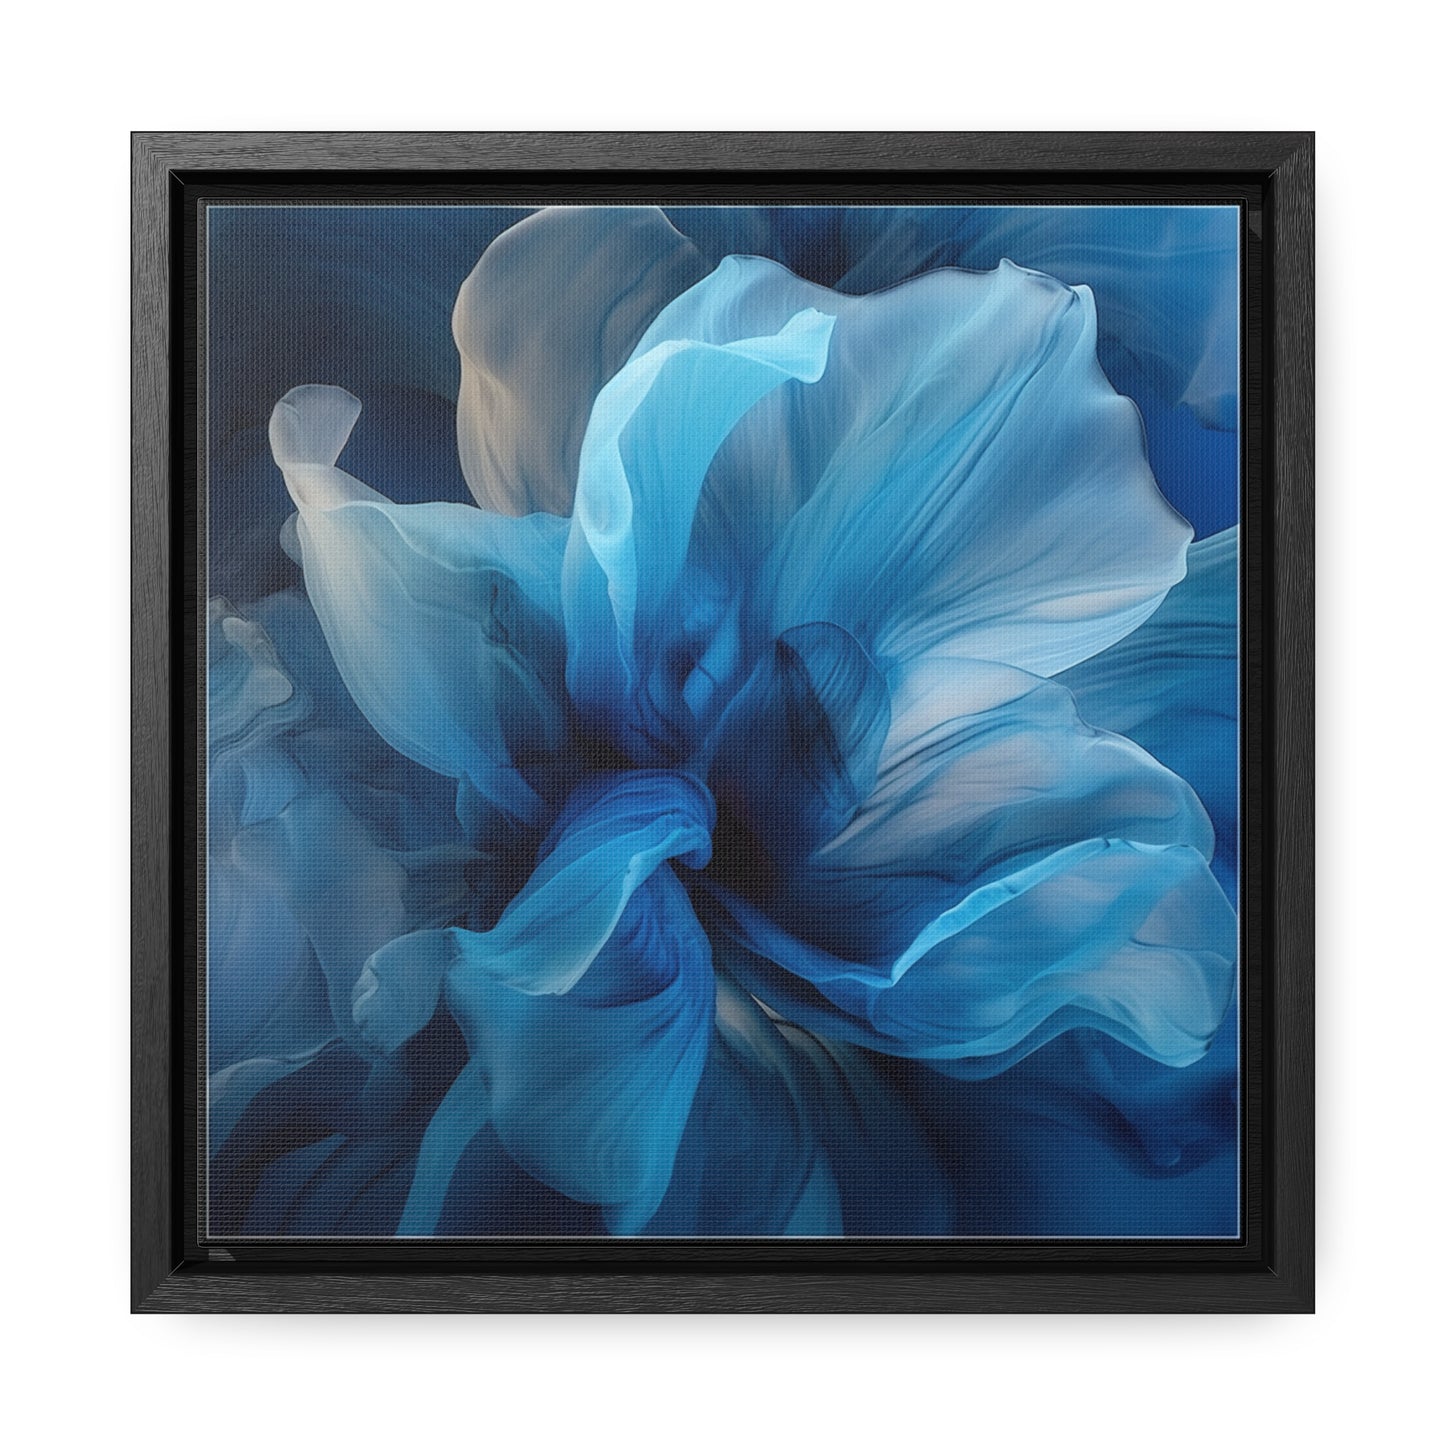 Gallery Canvas Wraps, Square Frame Blue Tluip Abstract 2